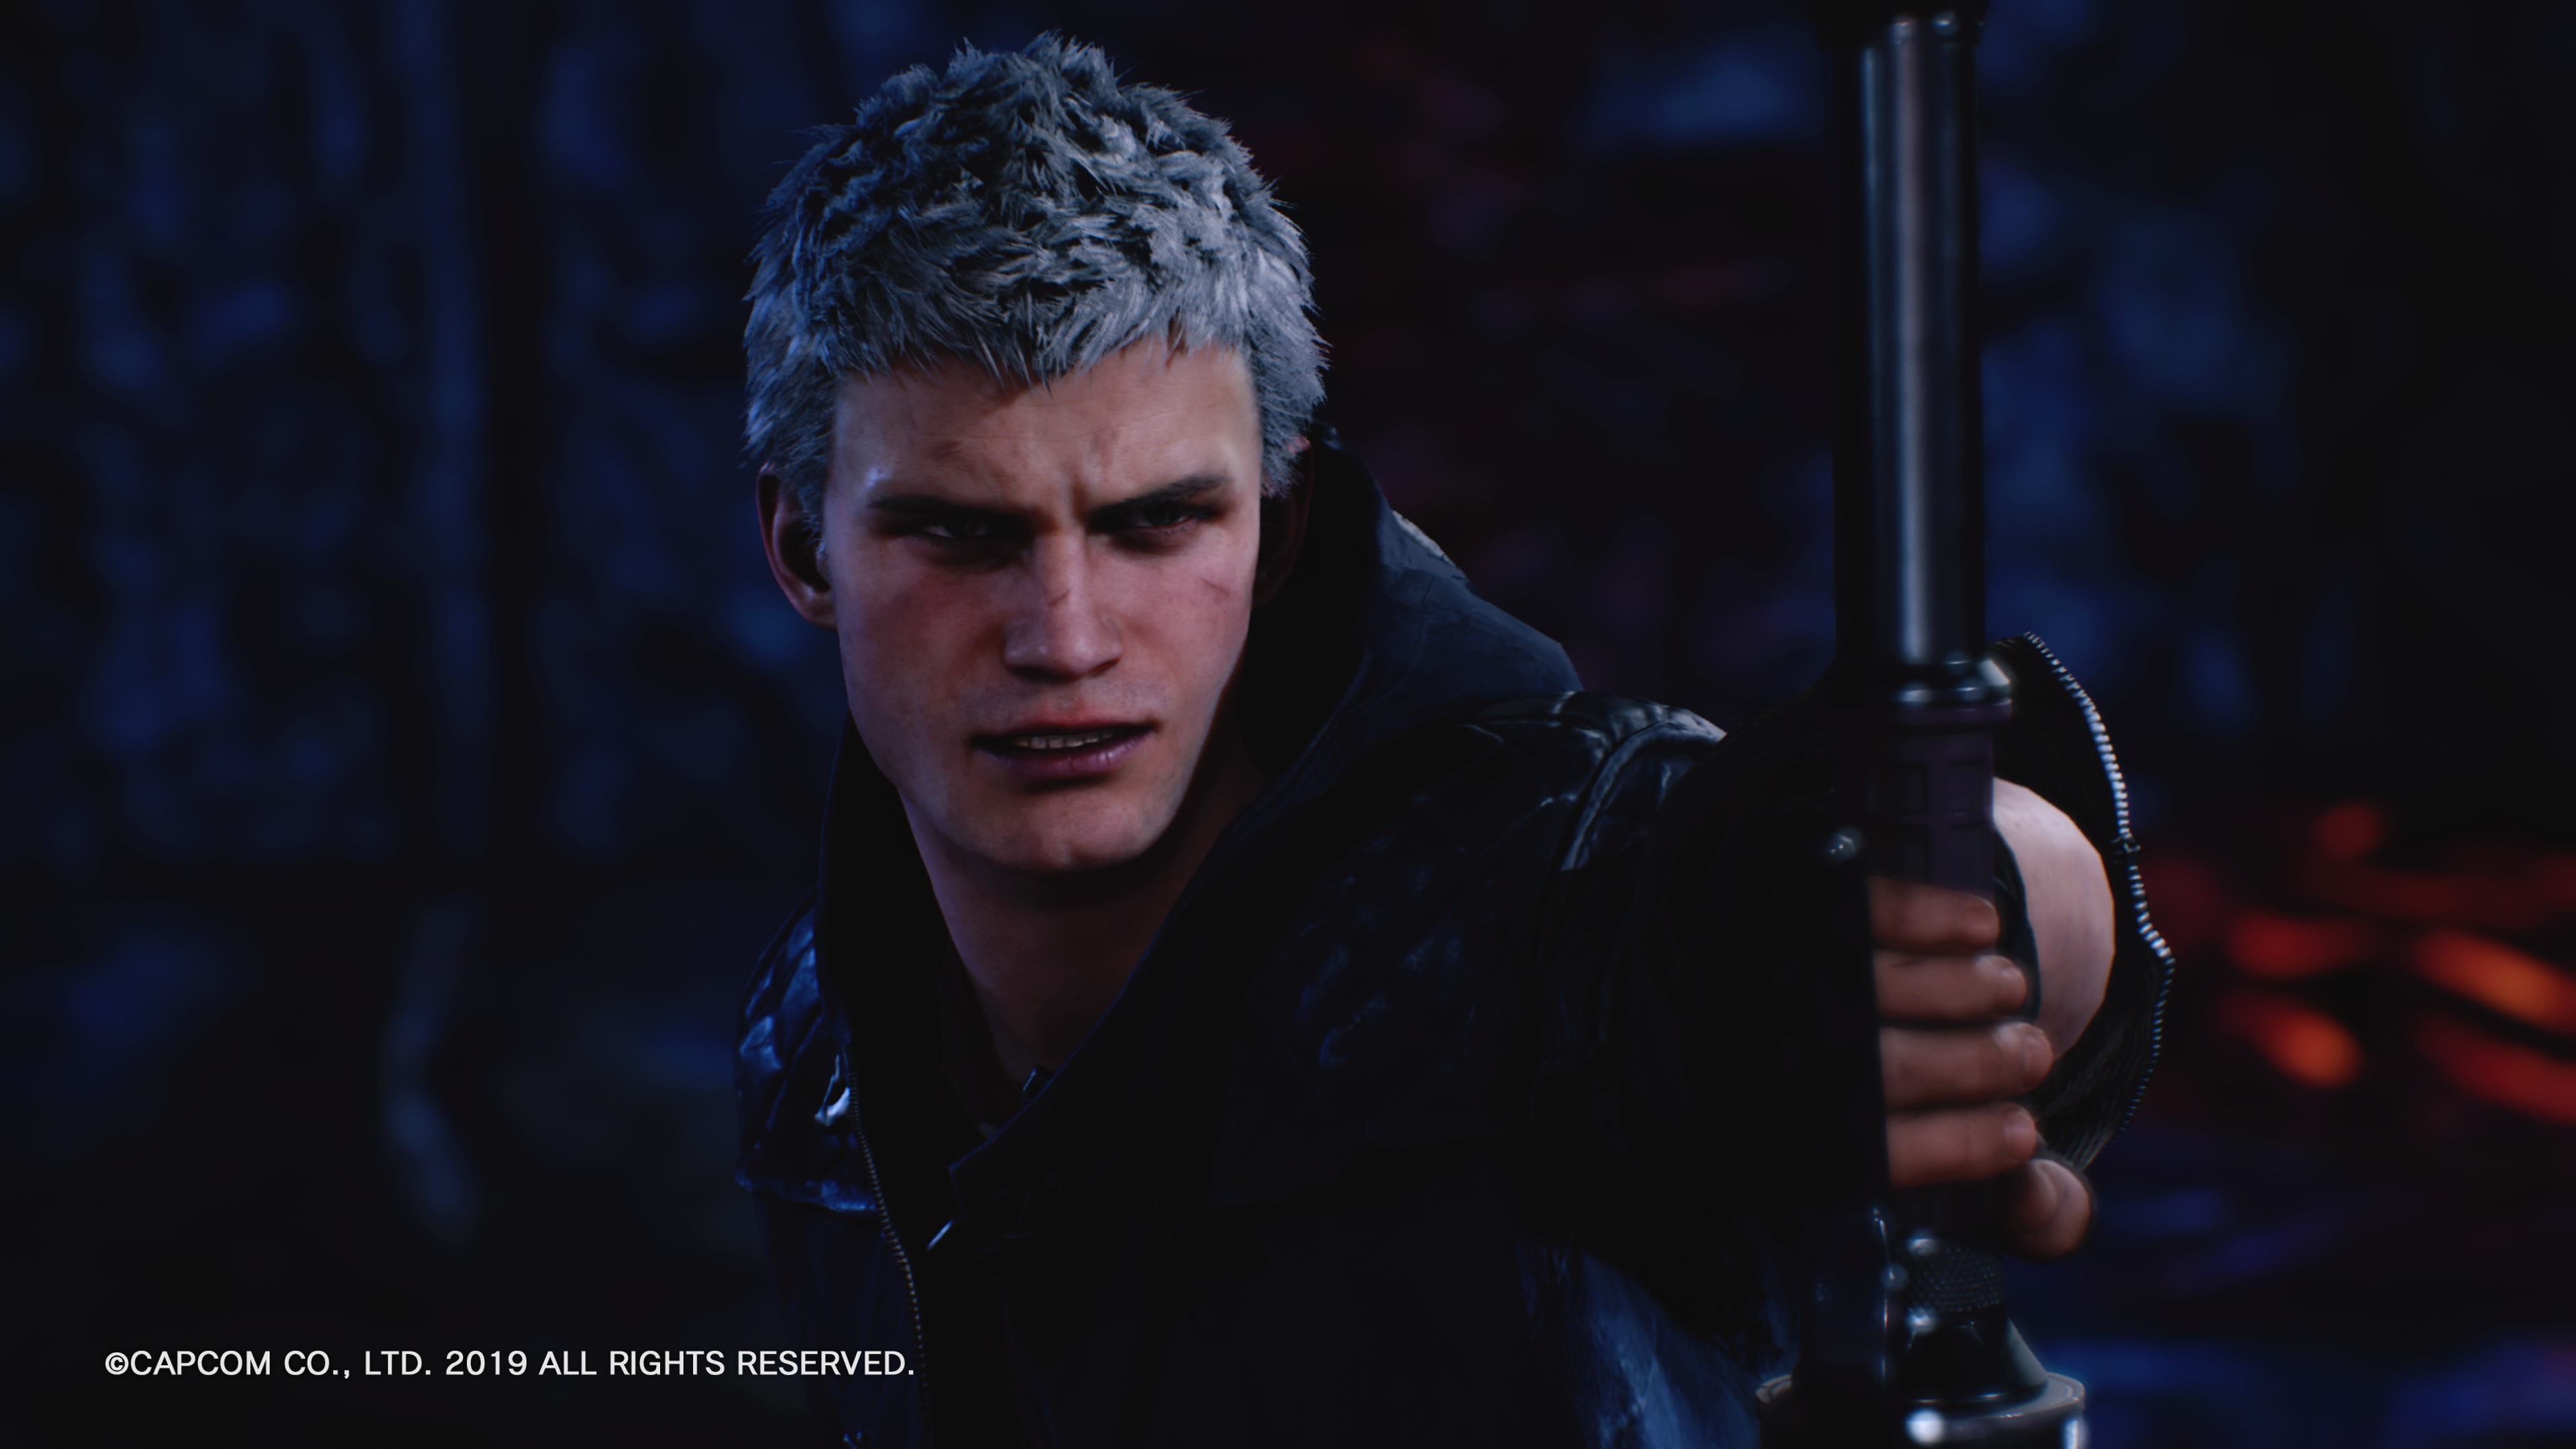 DMC 5 Has A Scene That's Seemingly Only Censored on Western PS4s